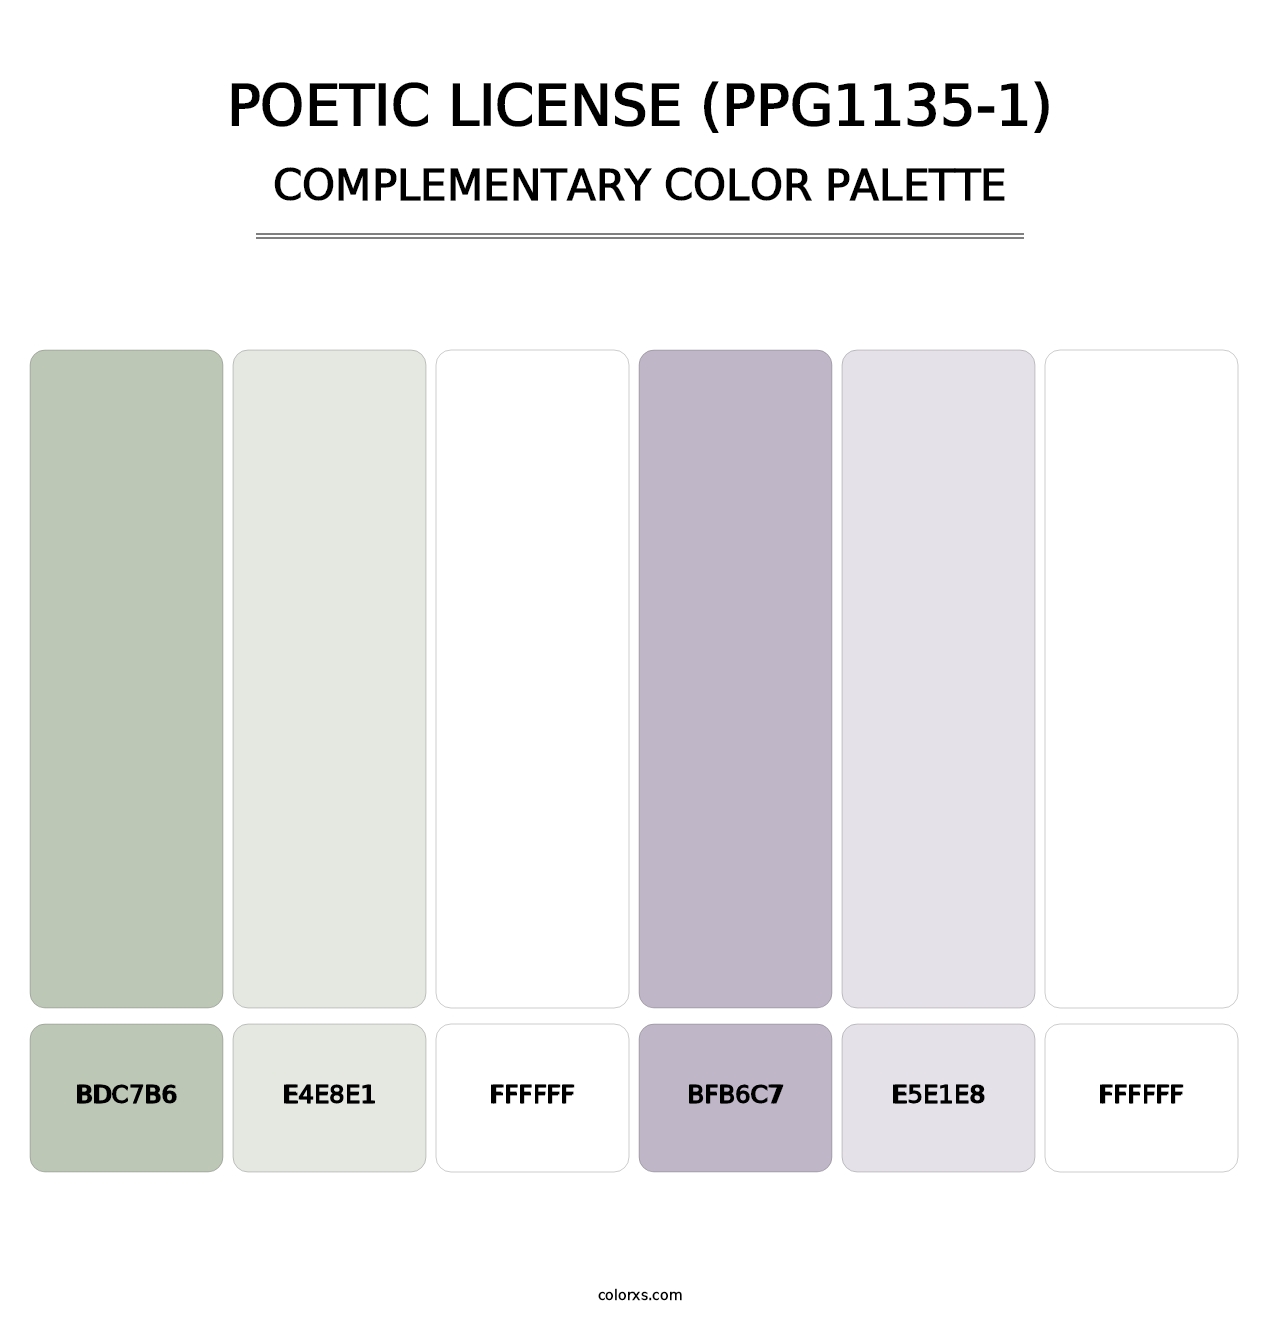 Poetic License (PPG1135-1) - Complementary Color Palette